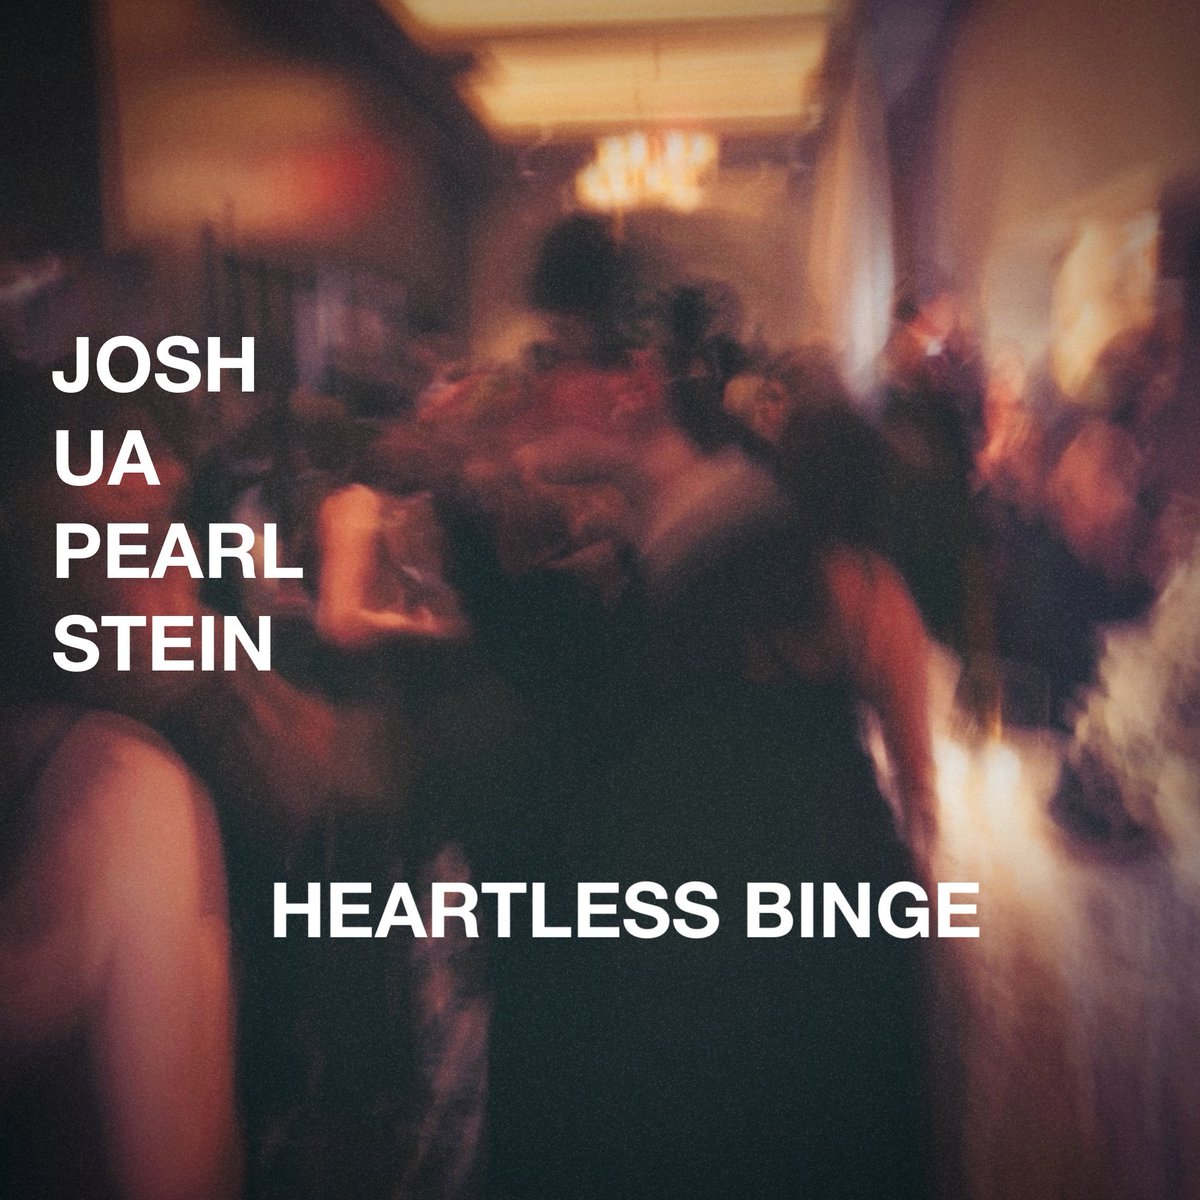 Listen to the single 'Heartless Binge' and discover the creativity of of up-and-coming Joshua Pearlstein.
#indiedockmusicblog #electronicpop

indiedockmusicblog.co.uk/?p=23929&fbcli…